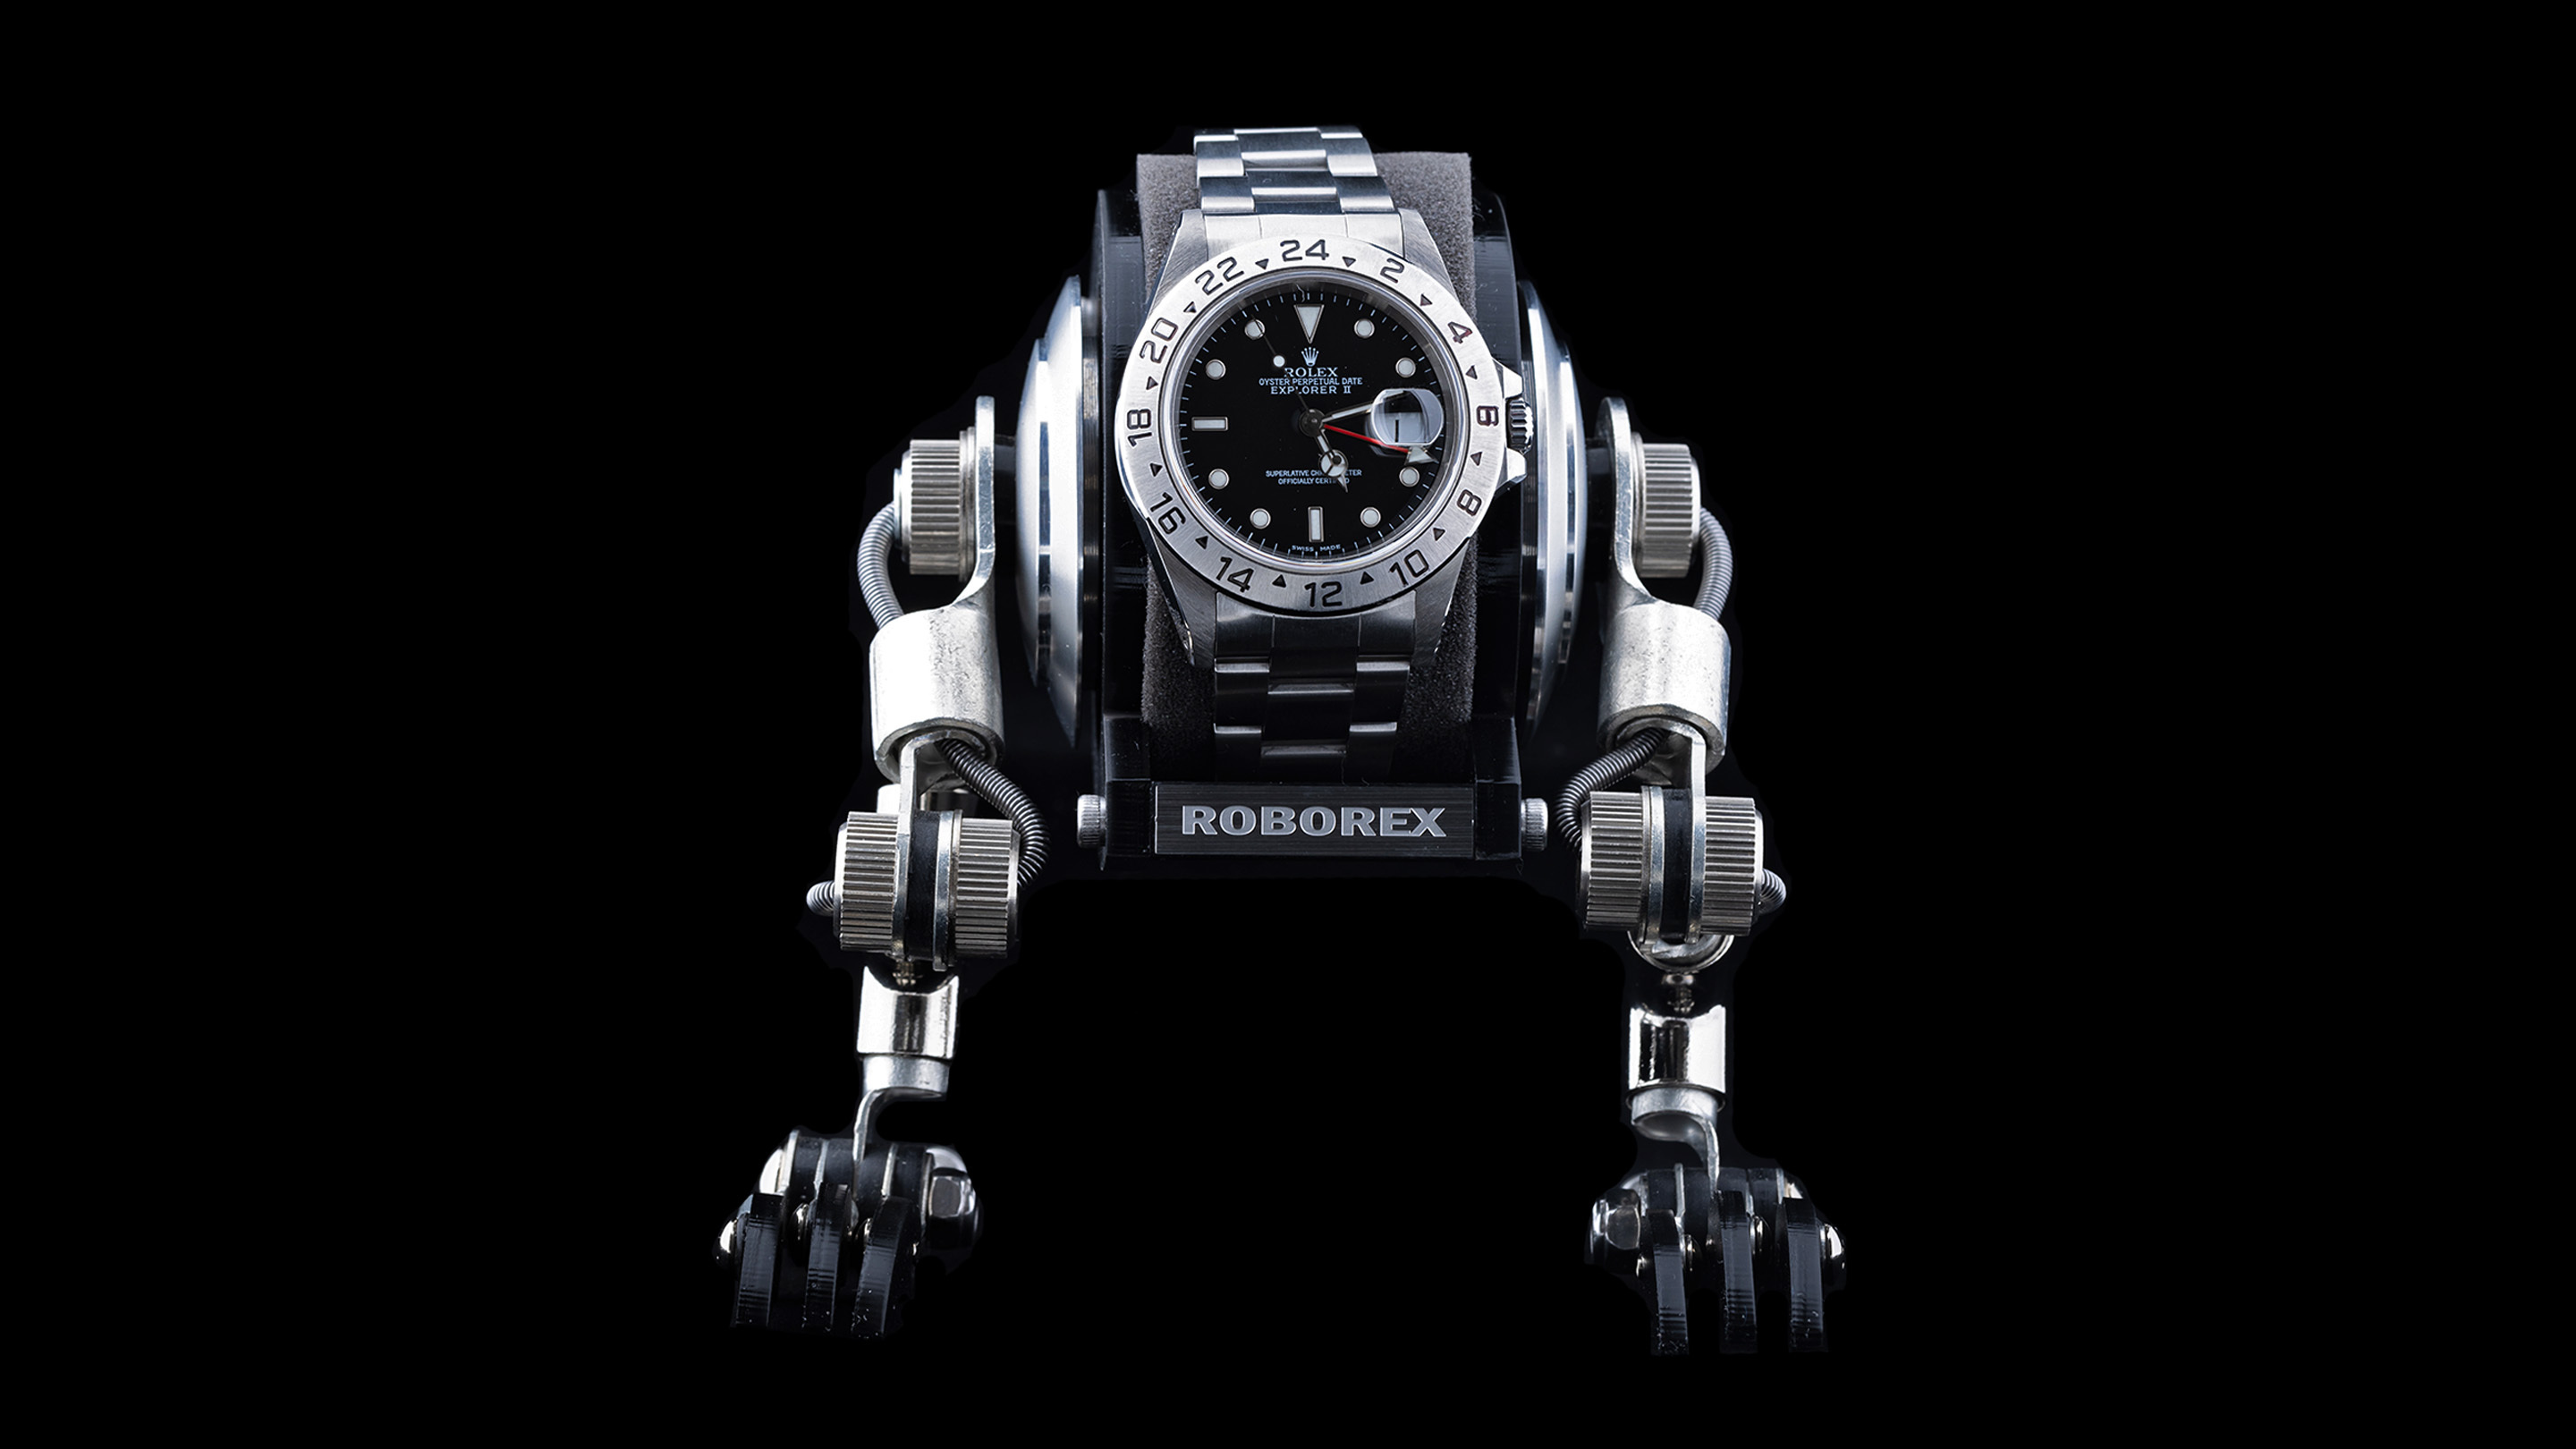 The Watches for Good and MB&F Fundraiser Roborex